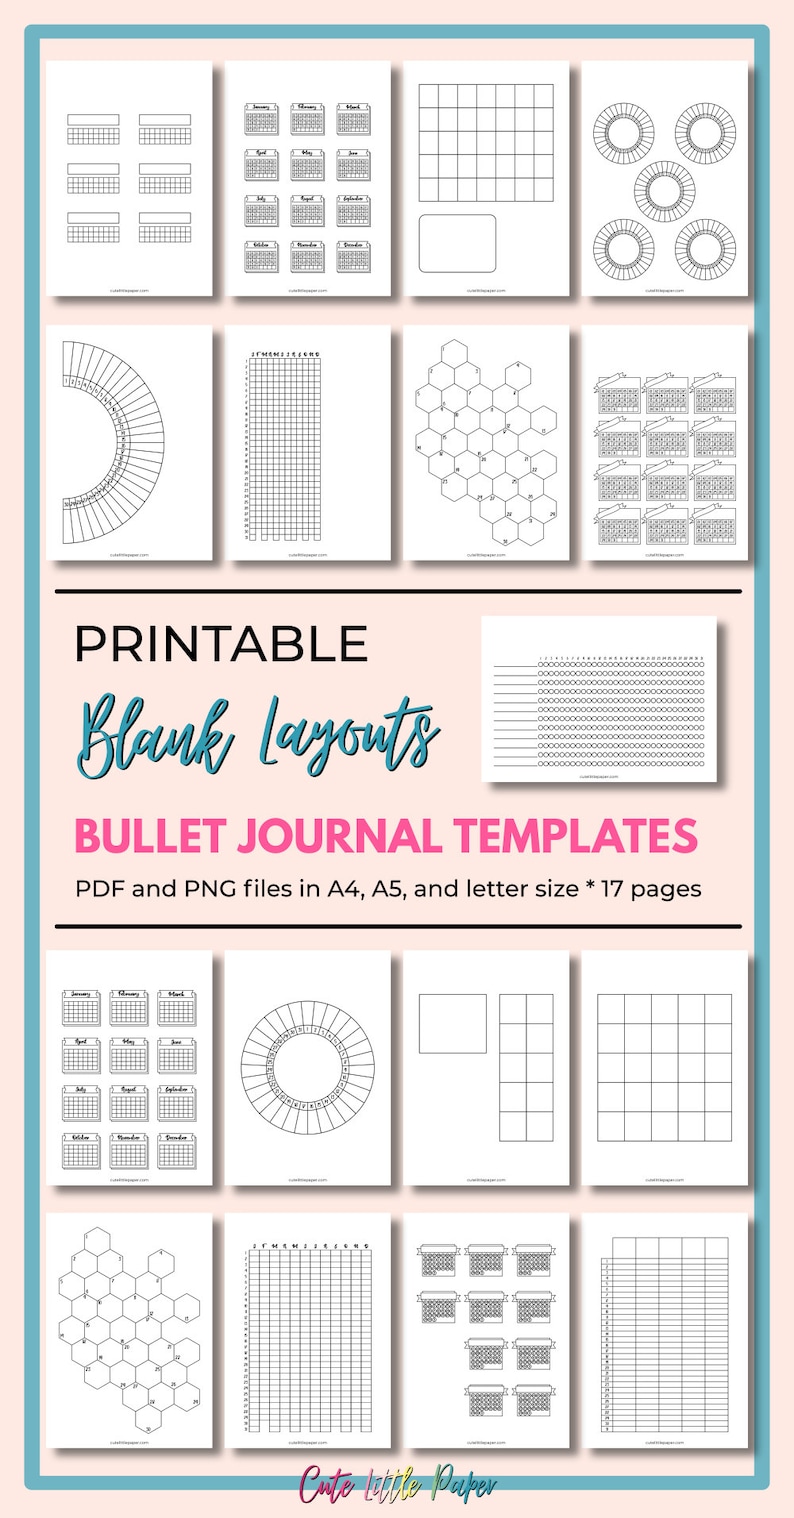 Printable Bullet Journal Templates. Blank BuJo Layouts And Grid Pages Set. Monthly & Yearly Tracker Pages Easy To Customize And Decorate. image 7